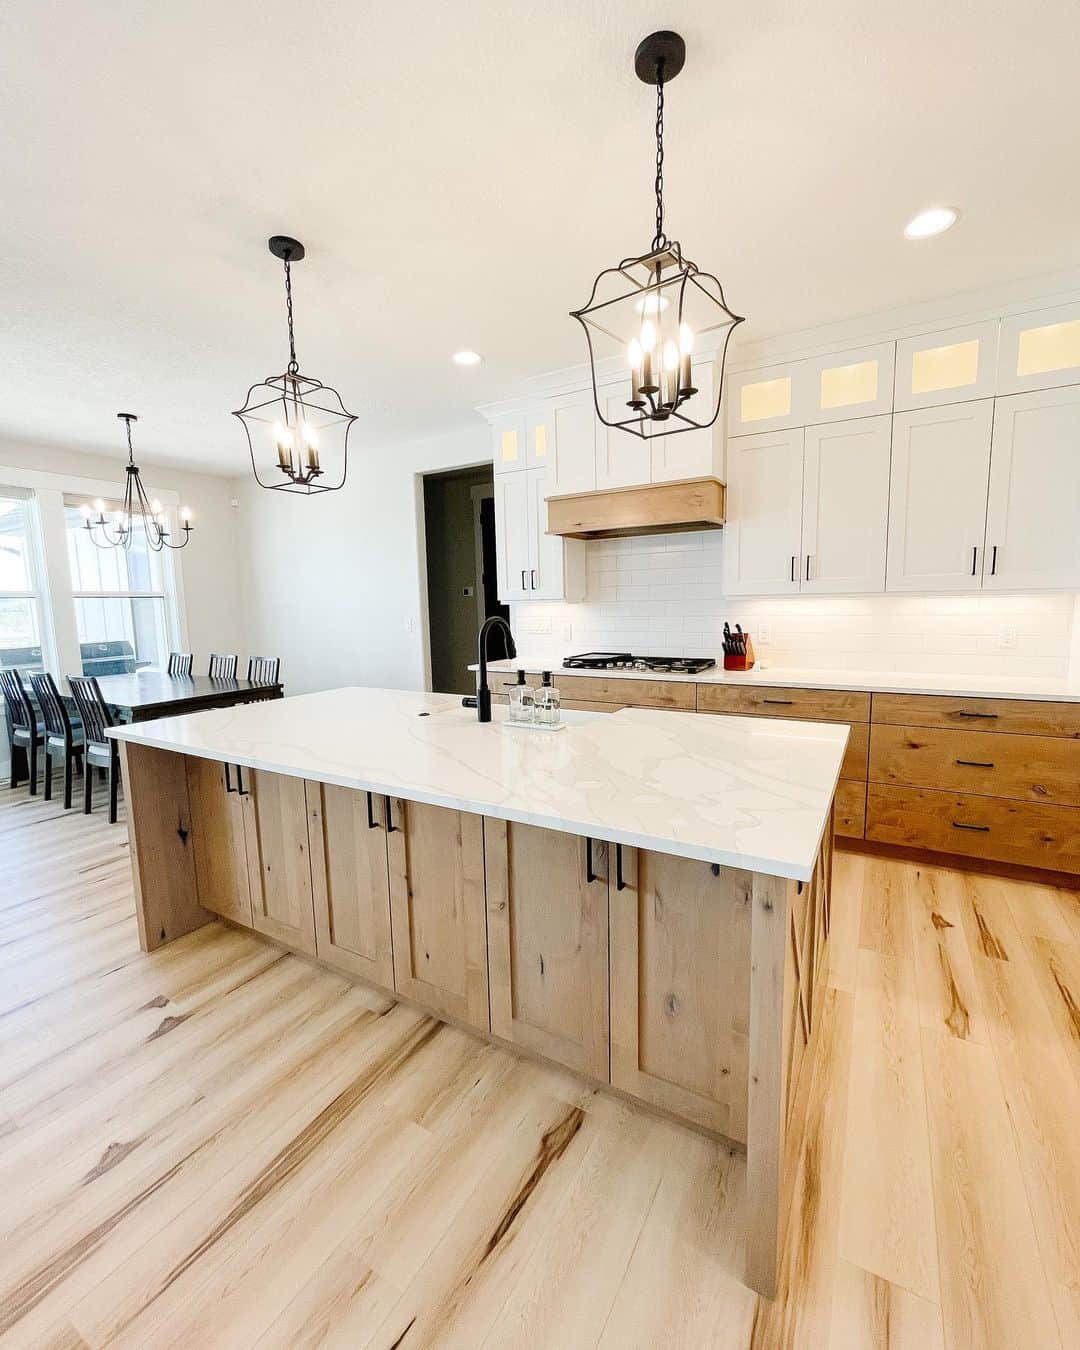 Revitalizing the Farmhouse Kitchen with Wooden Cabinetry